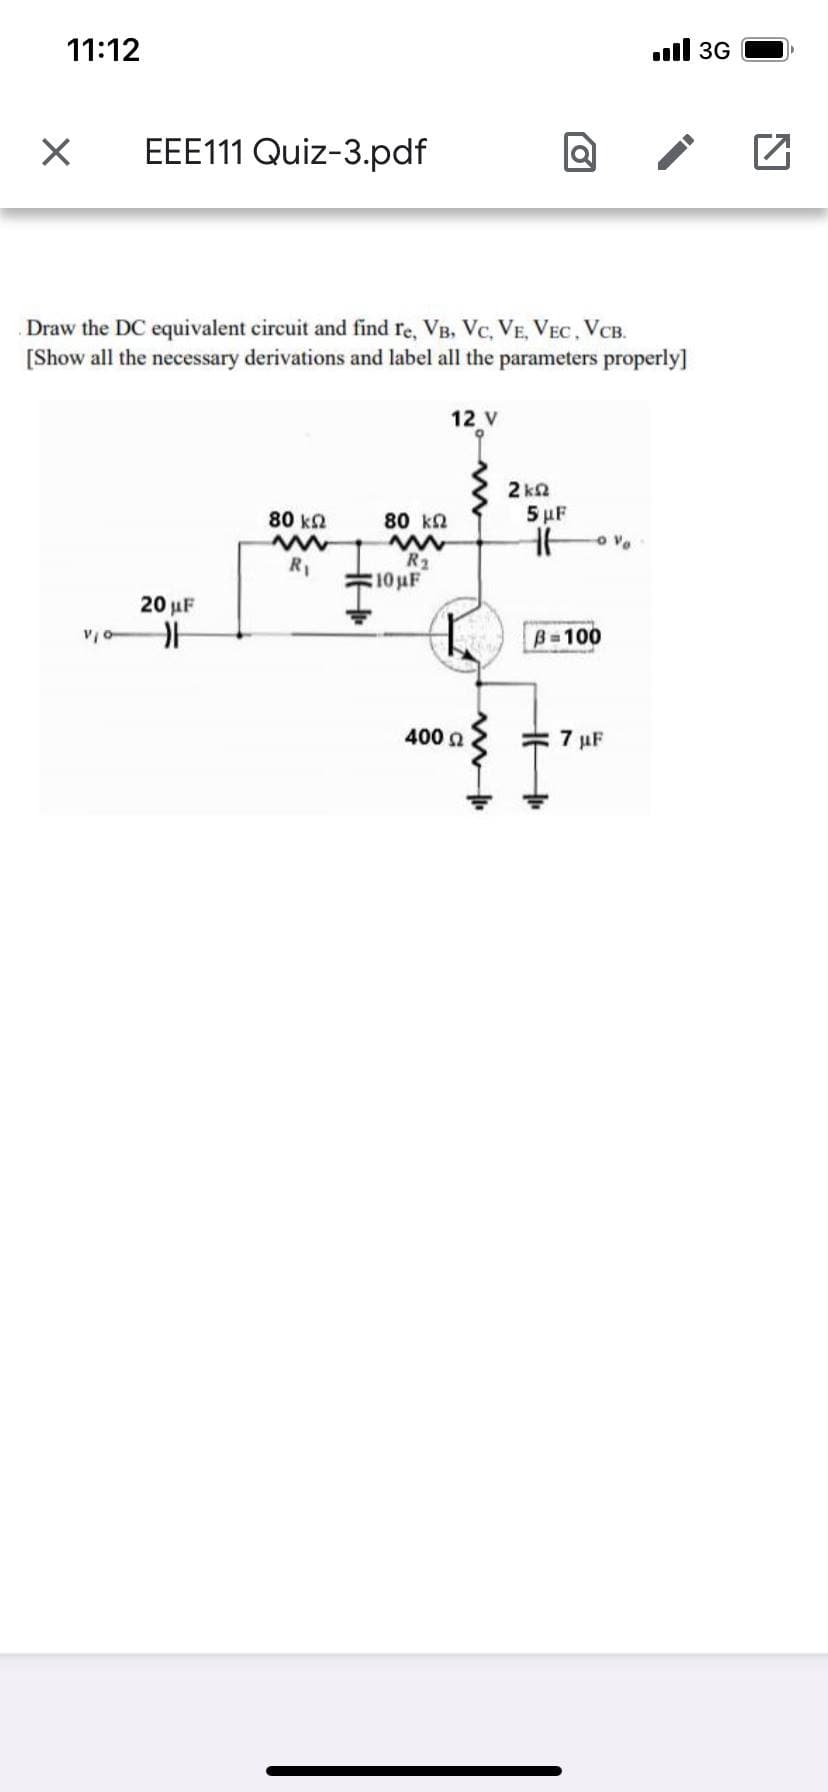 11:12
ull 3G
EEE111 Quiz-3.pdf
Draw the DC equivalent circuit and find re, VB, Vc, VE, VEC, VCB.
[Show all the necessary derivations and label all the parameters properly]
12 V
2 ka
80 k2
80 k
5 uF
R2
10 uF
R1
20 µF
B-100
400 n
7 µF
